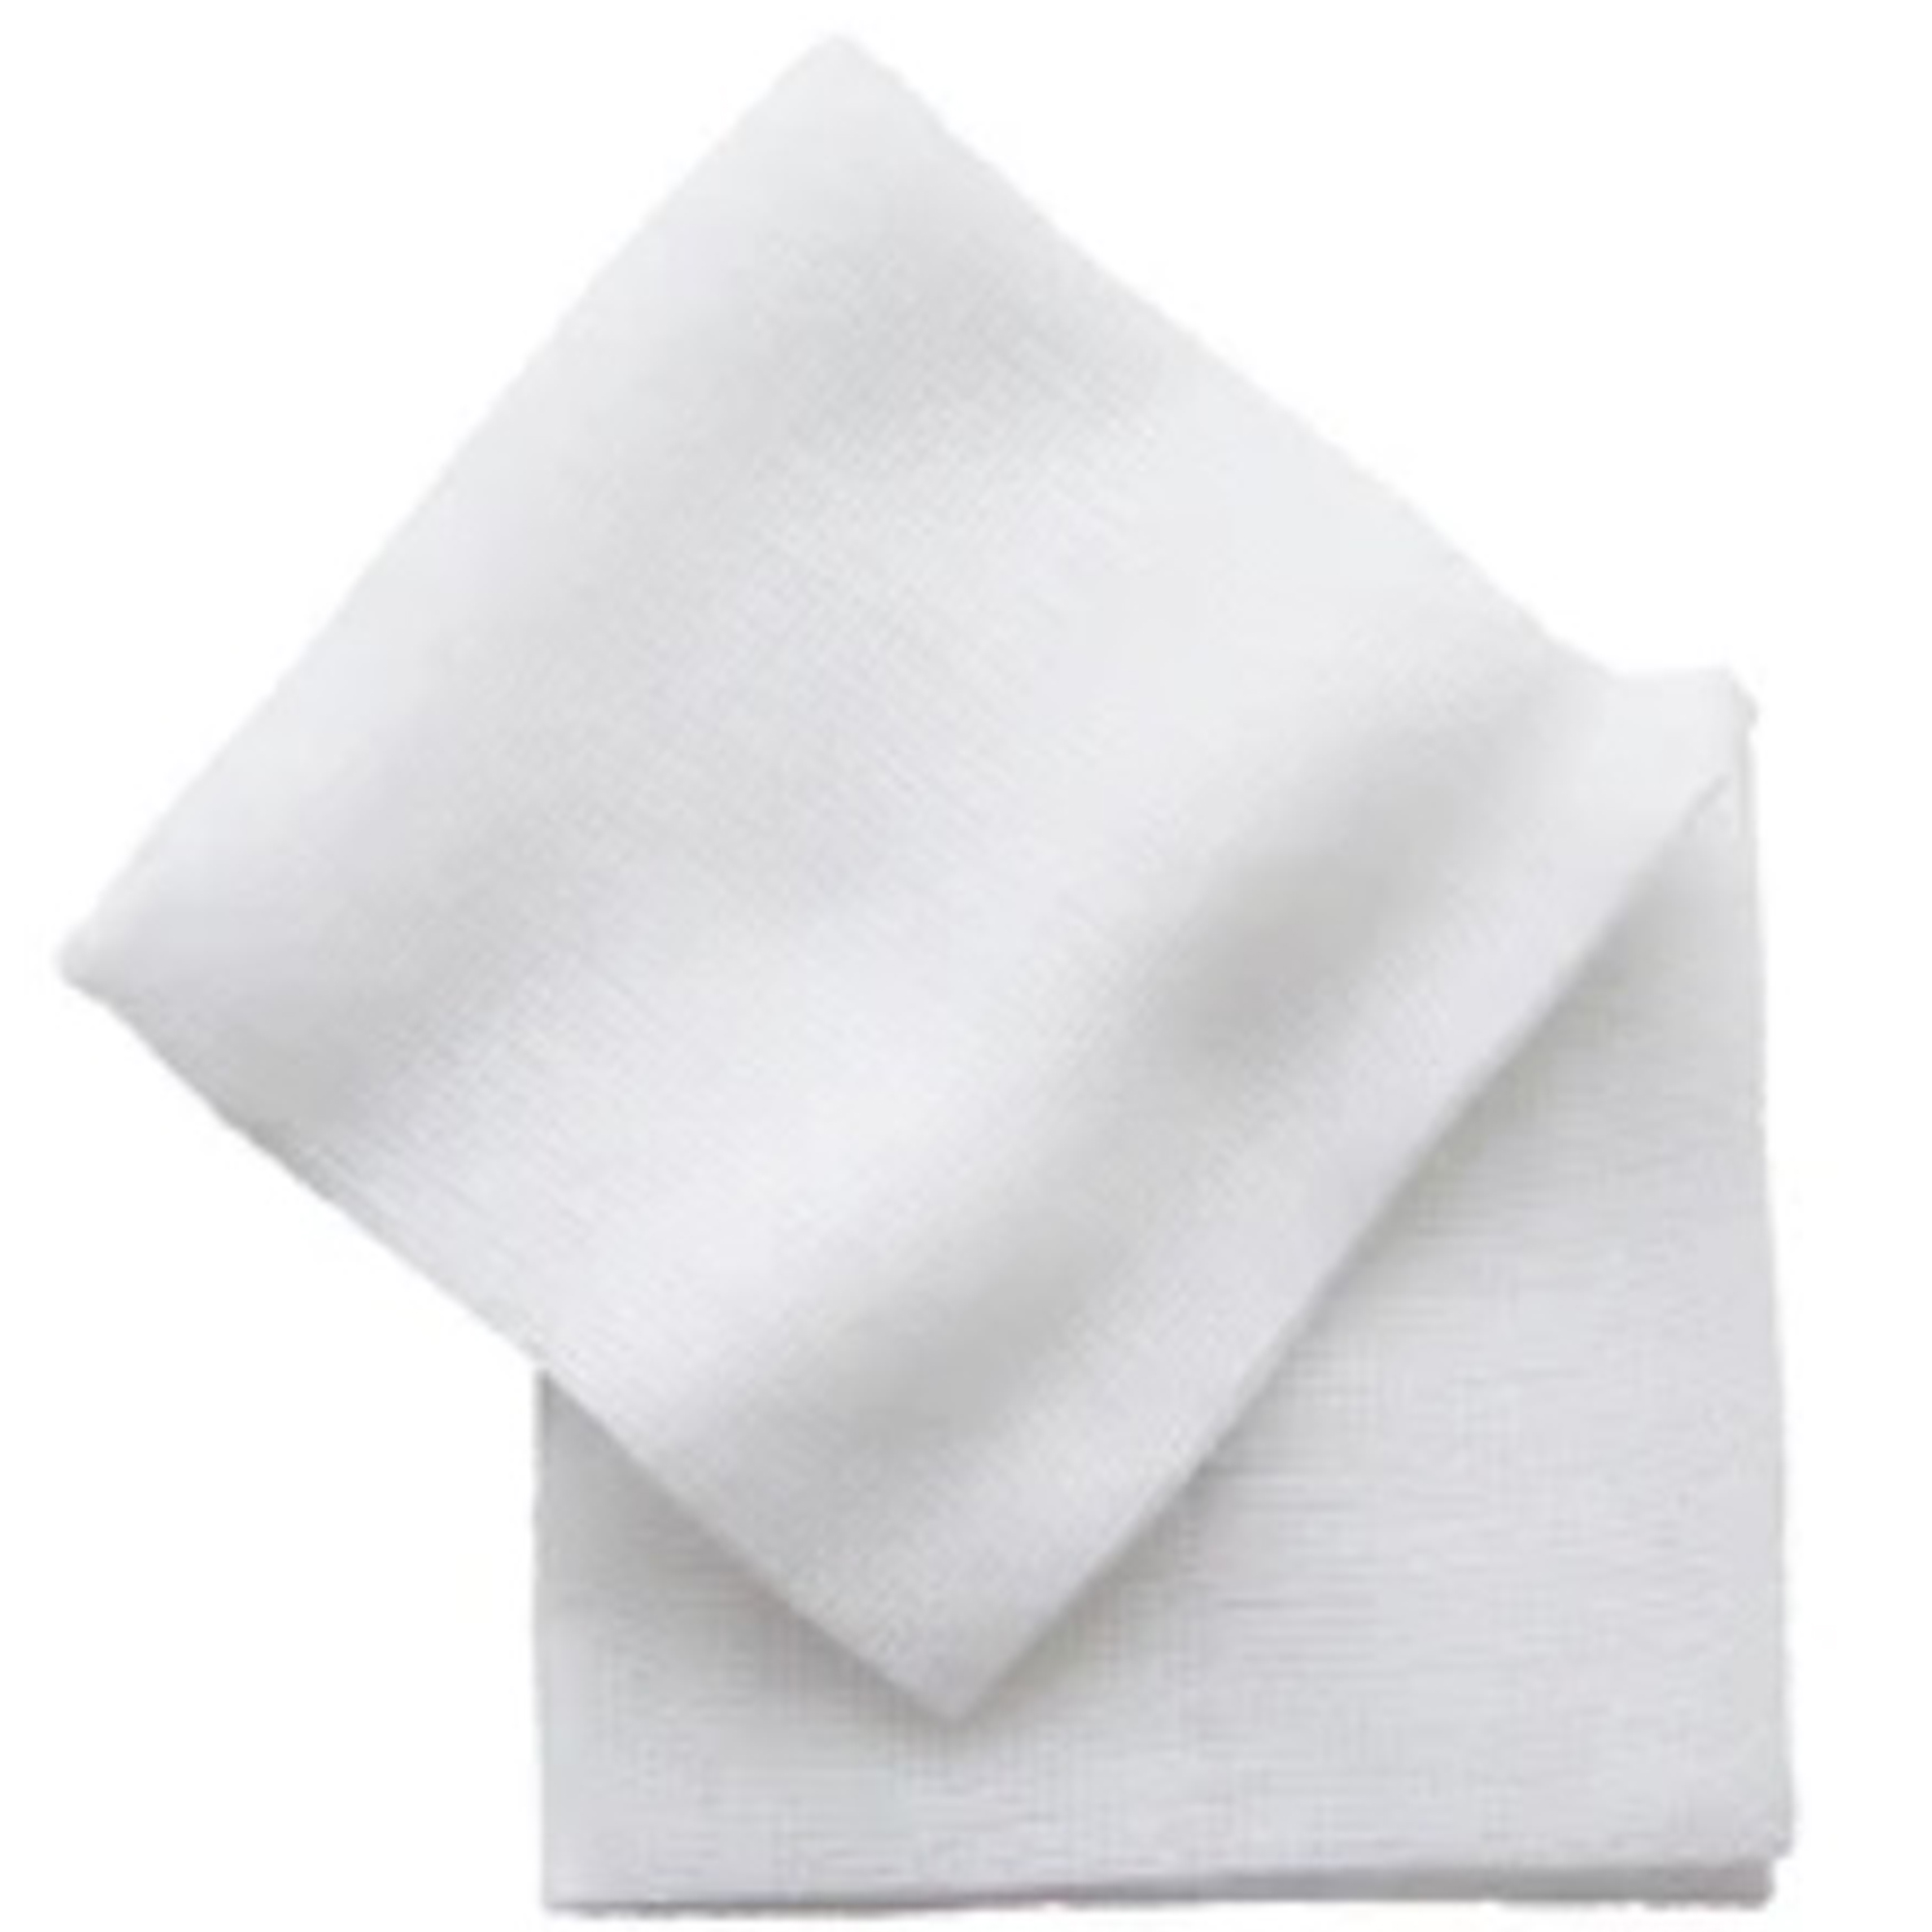 Medical practice/GAUZE COMPRESSES, SWABS, BANDAGES/Medical Non-woven Gauze Swabs & Alcohol pads